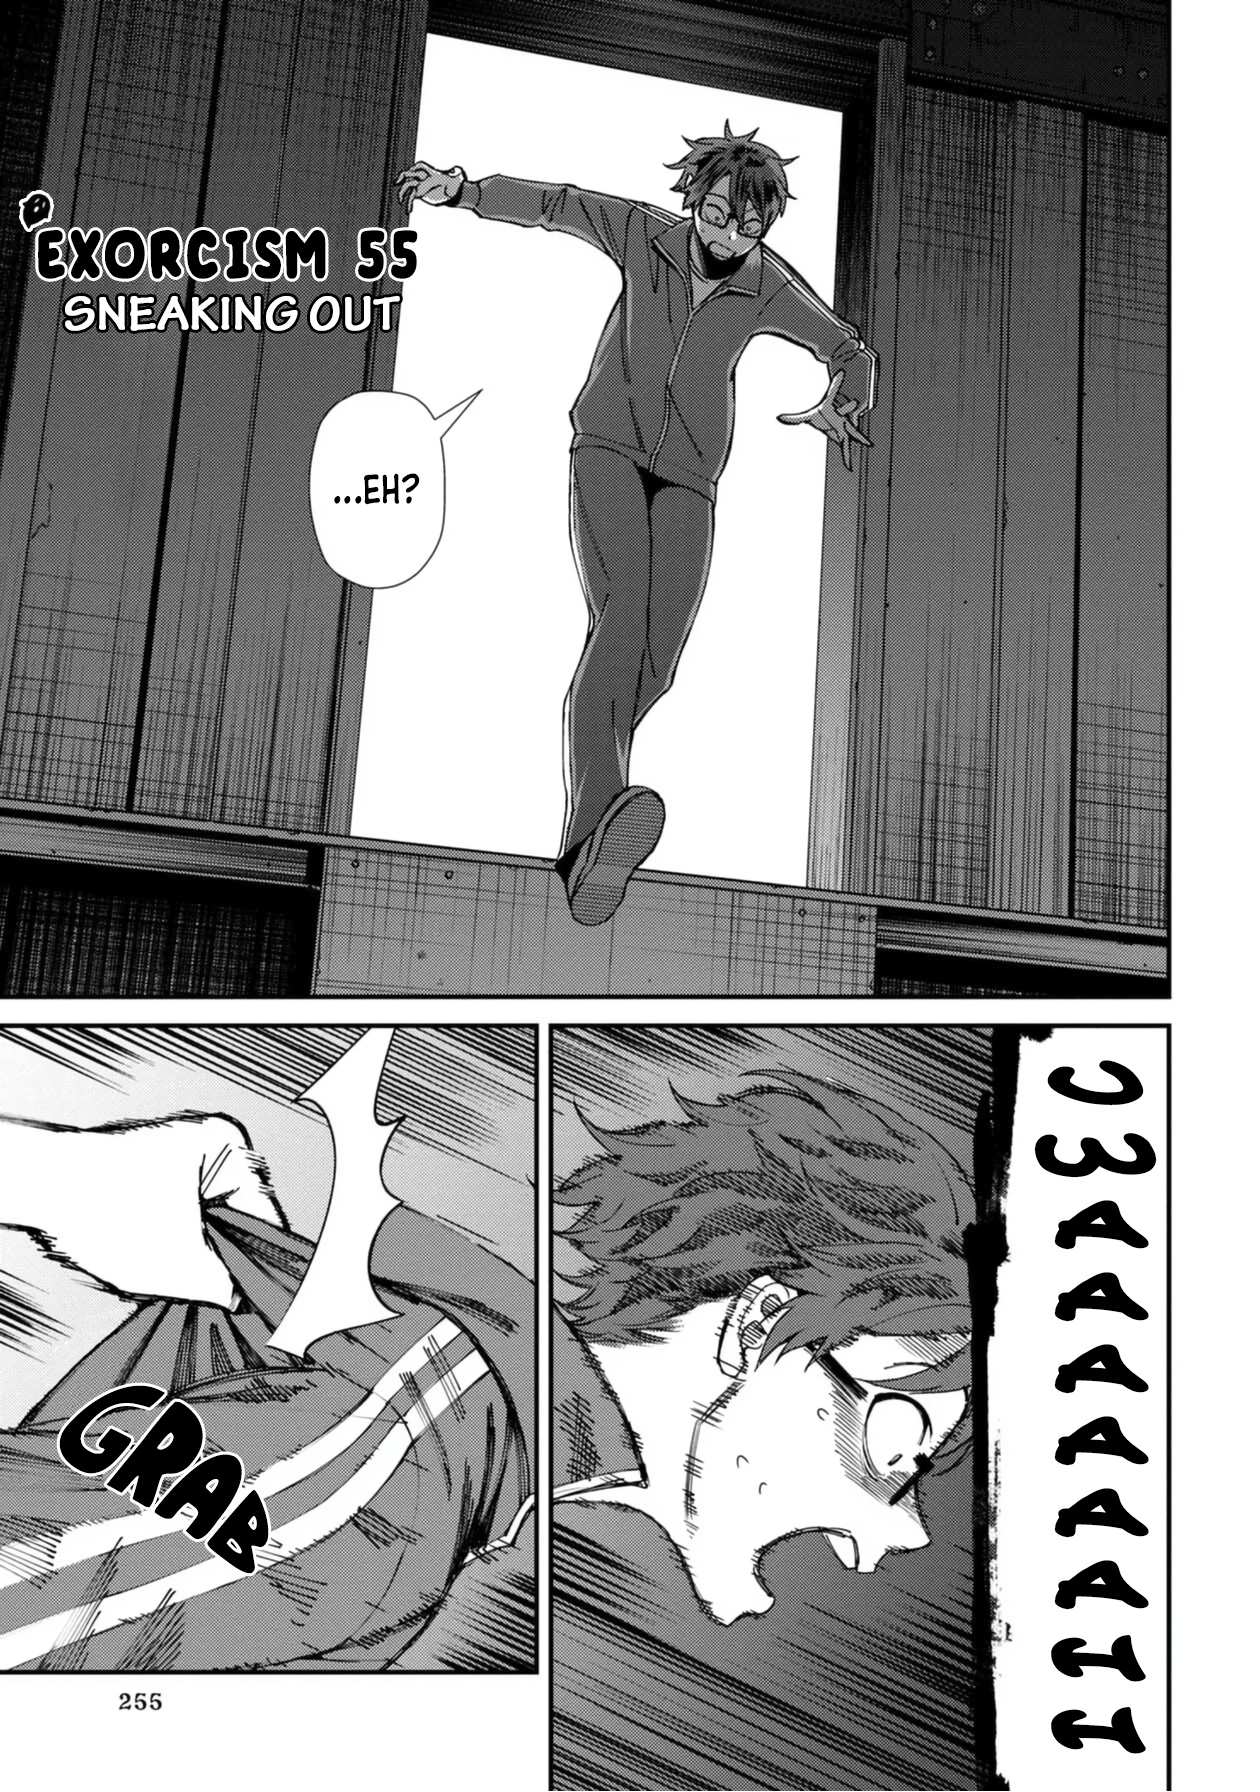 Bad Girl-Exorcist Reina Vol.5 Chapter 55: Exorcism #55 - Sneaking Out - Picture 1